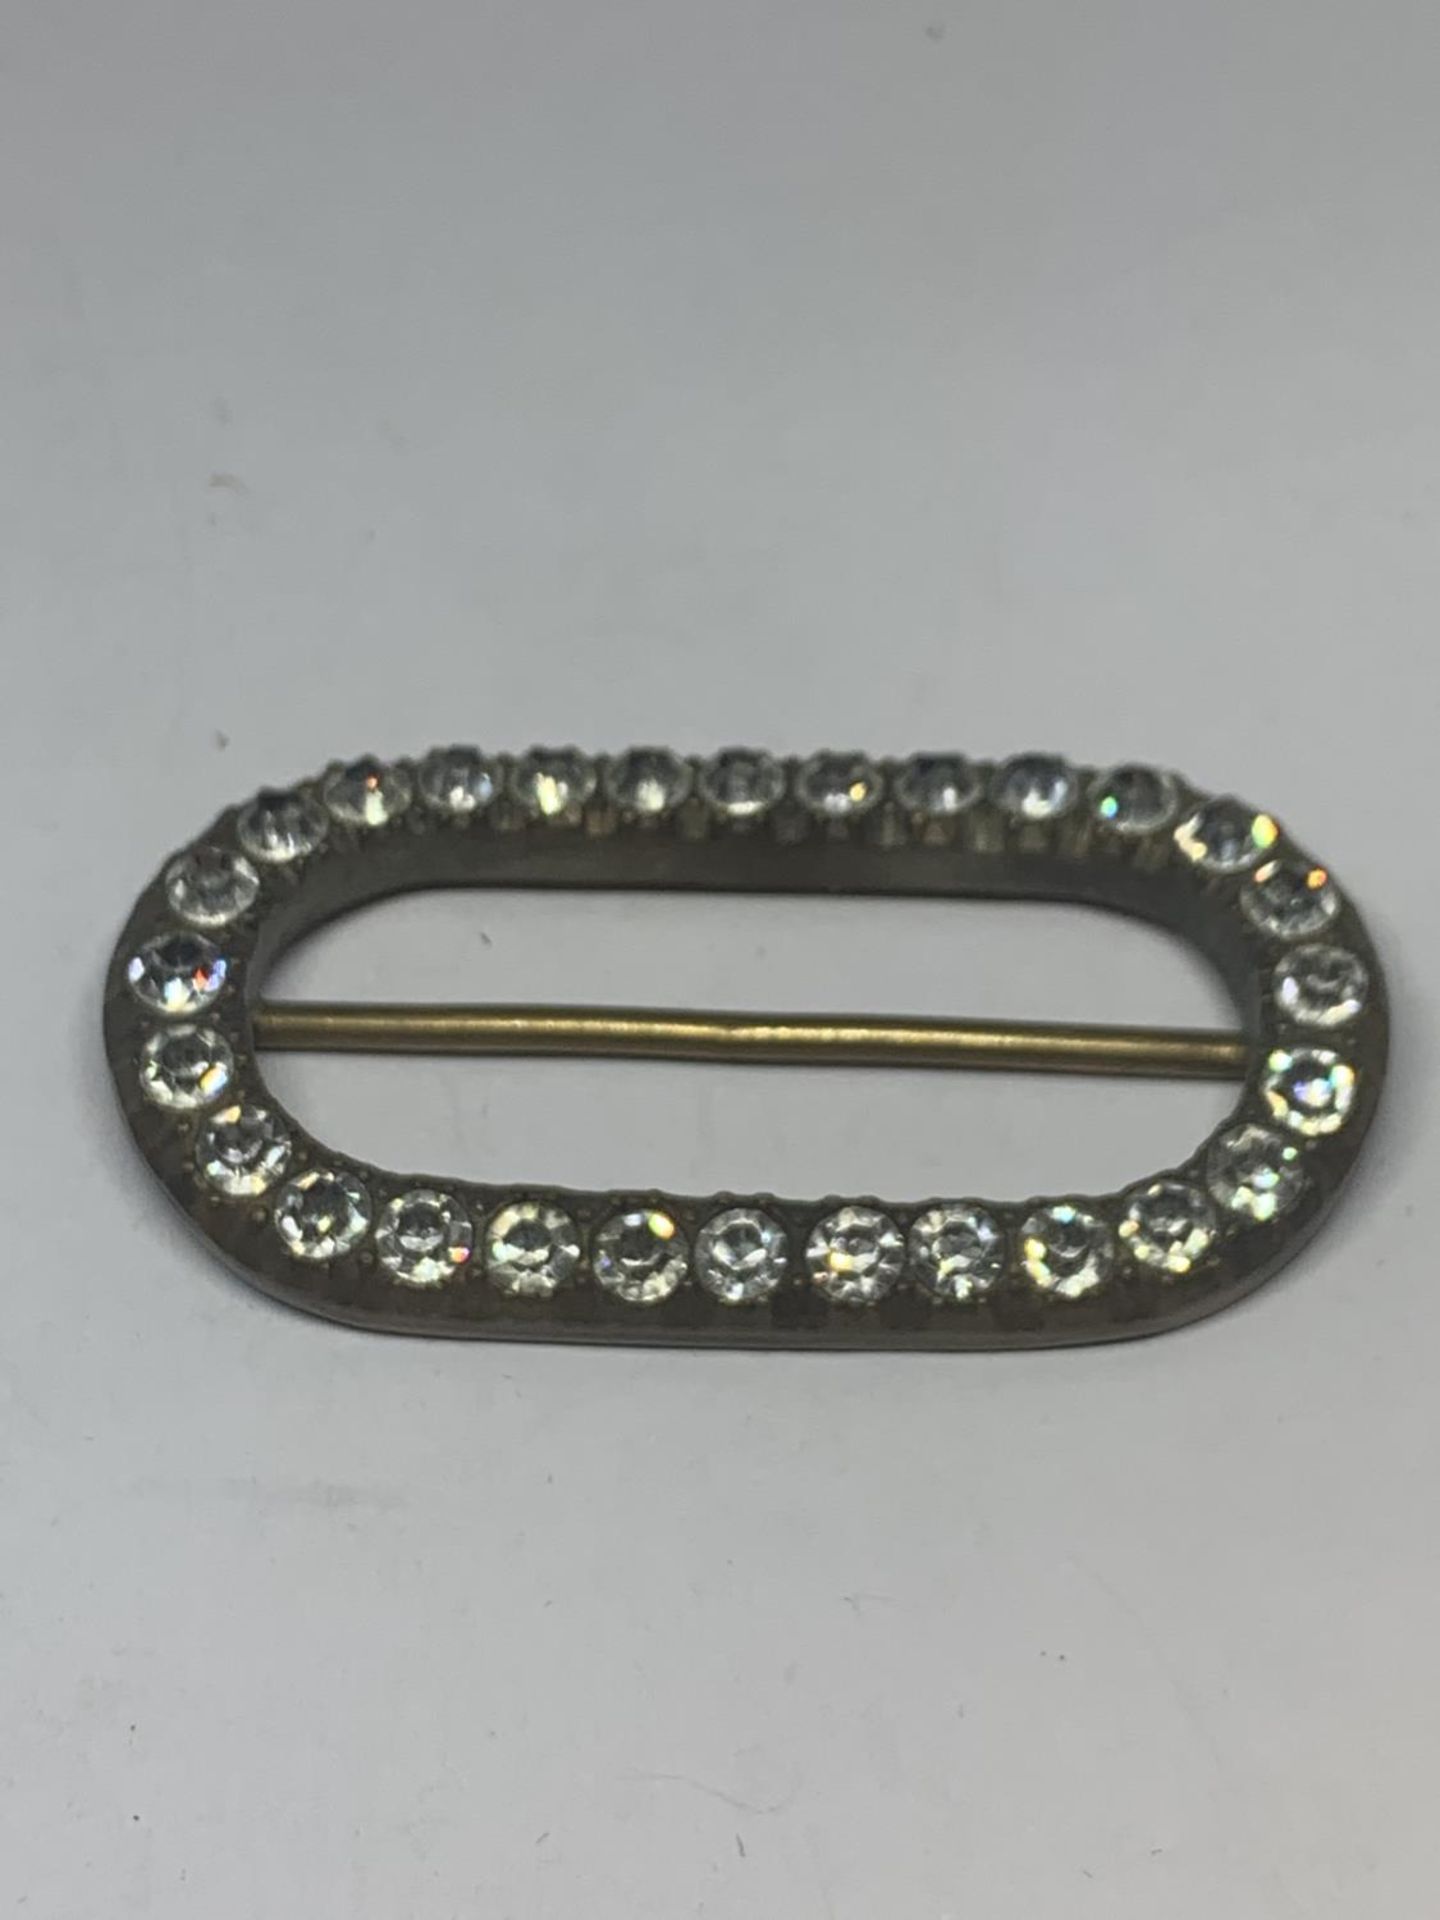 A DECORATIVE GEORGIAN SHOE BUCKLE WITH CLEAR STONES